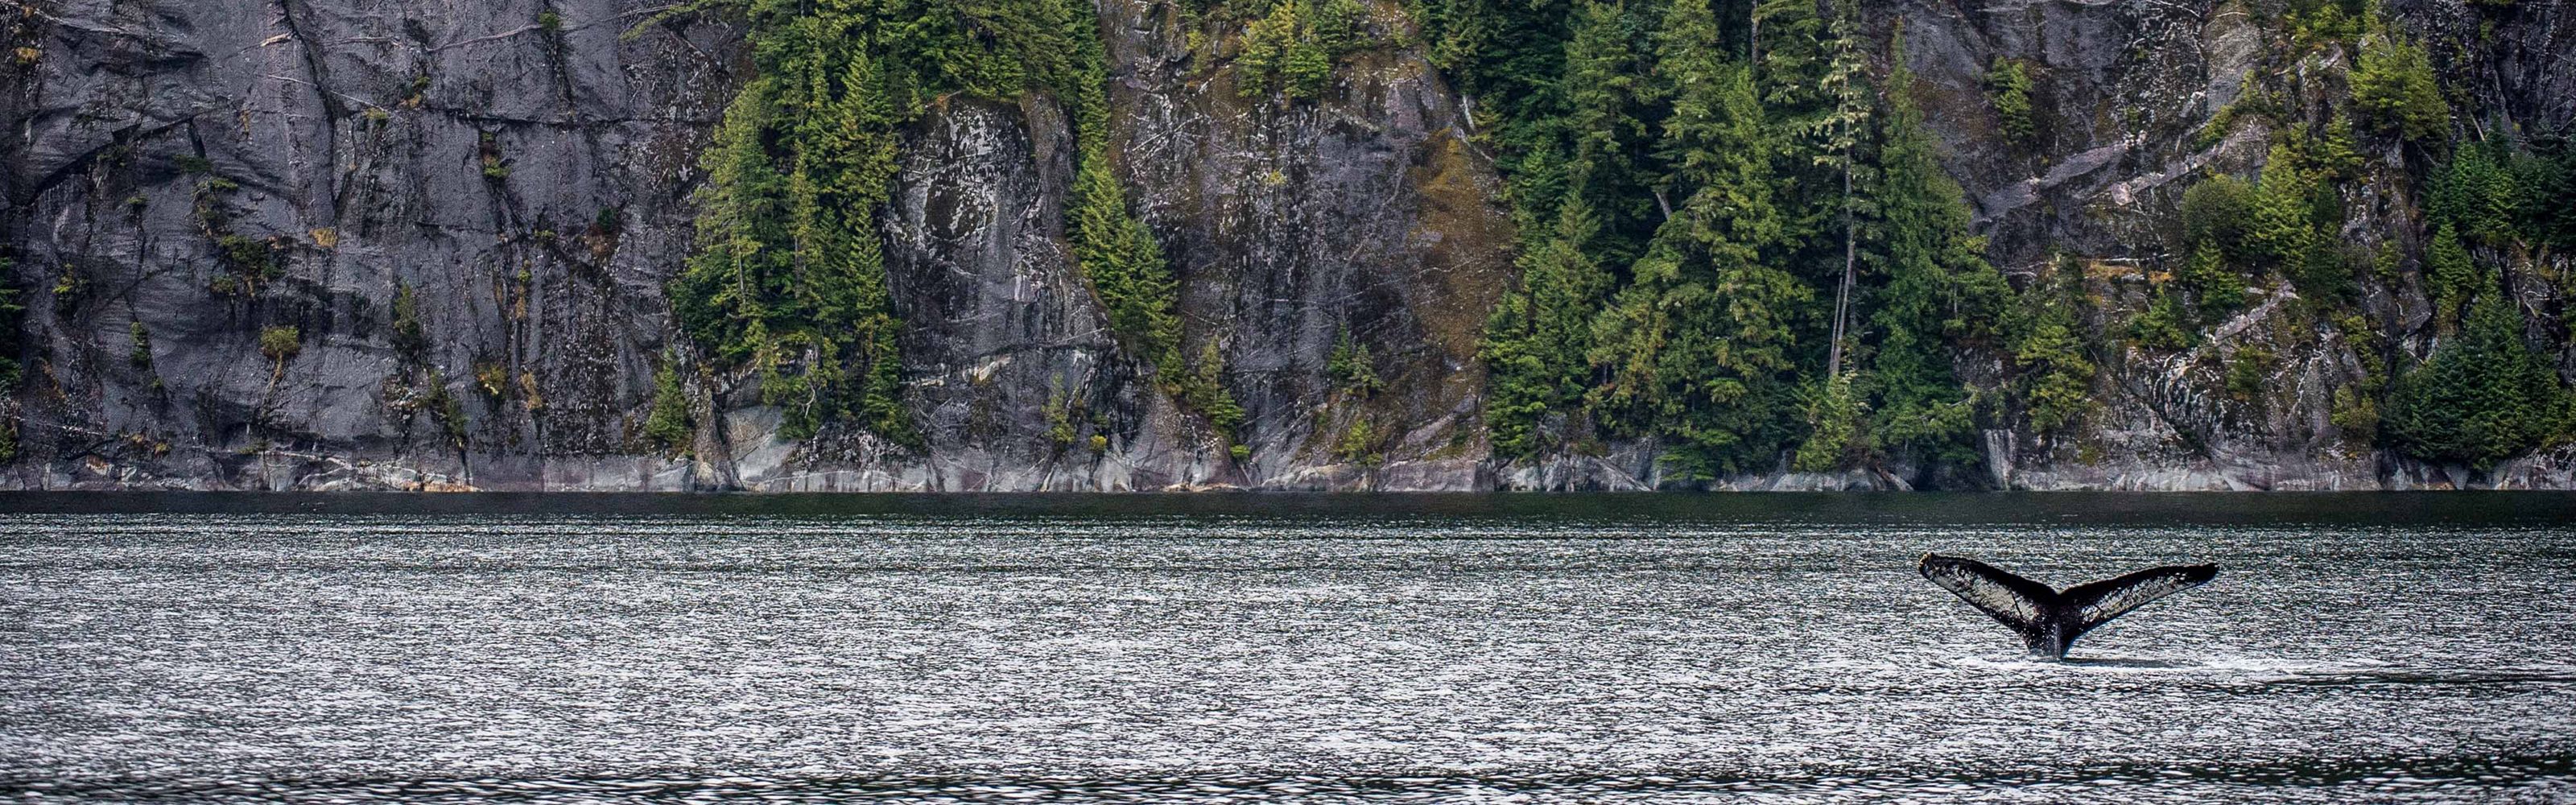 A whale tale pops out of the water in front of a cliff with trees on it.